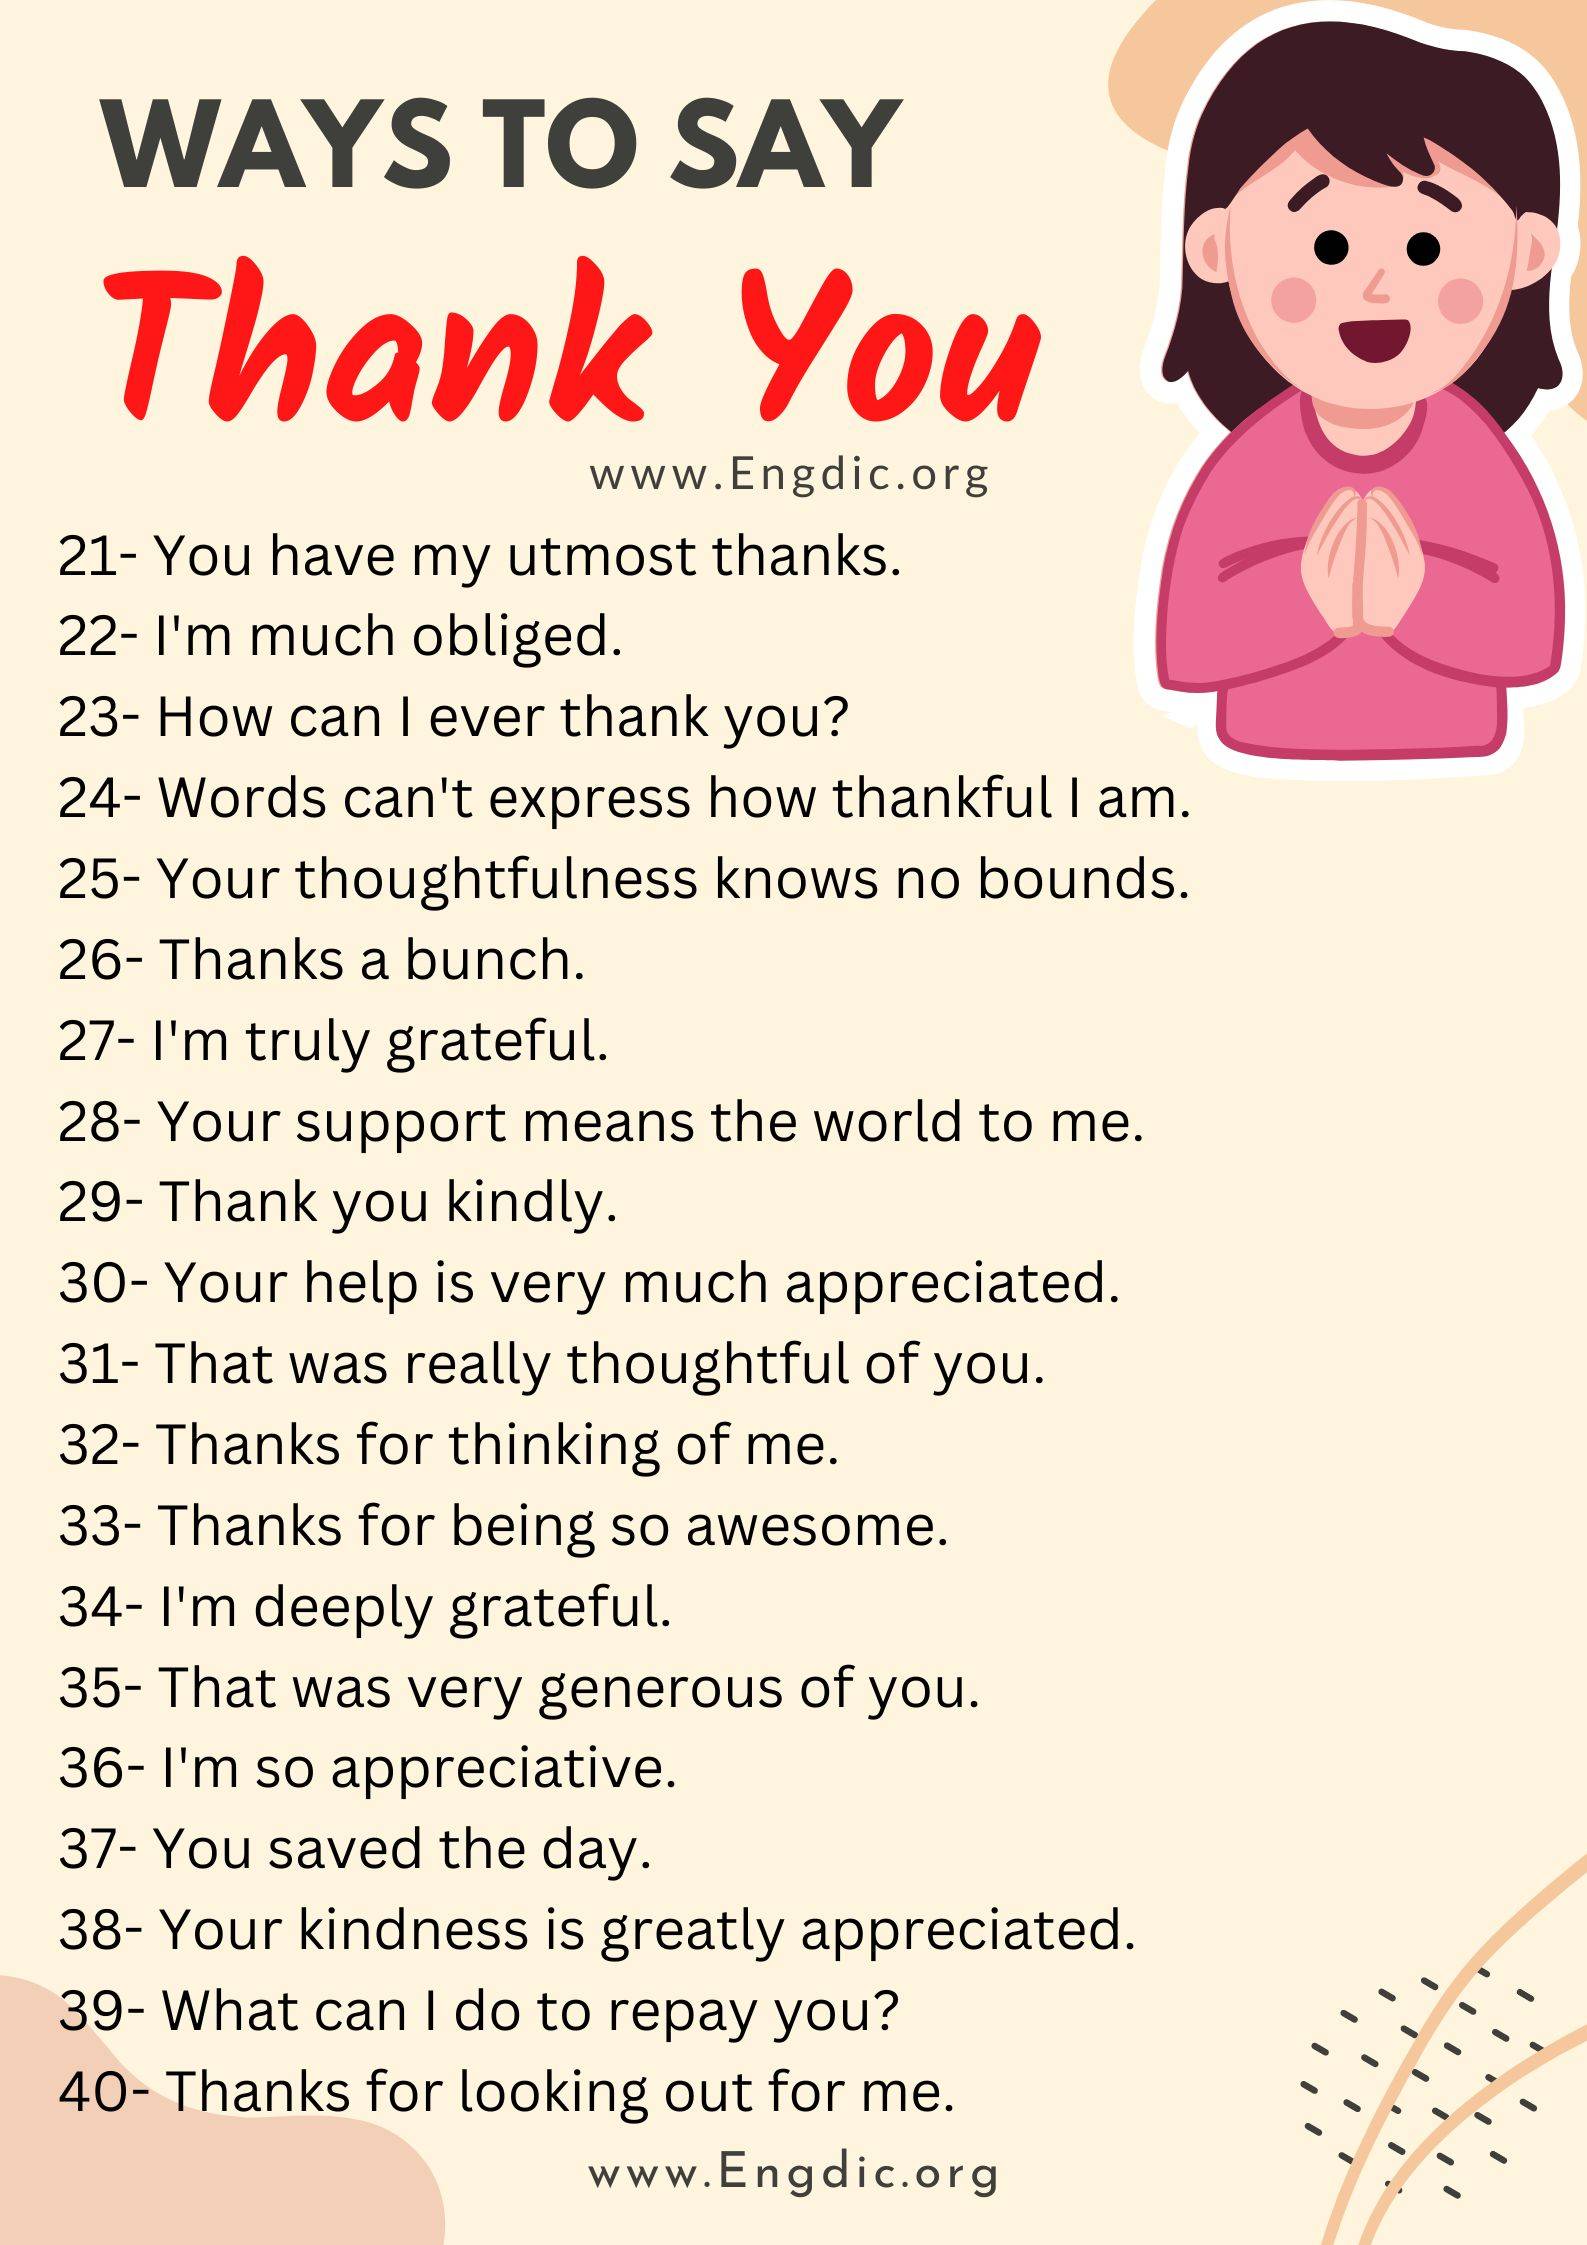 Ways to say thank you 2